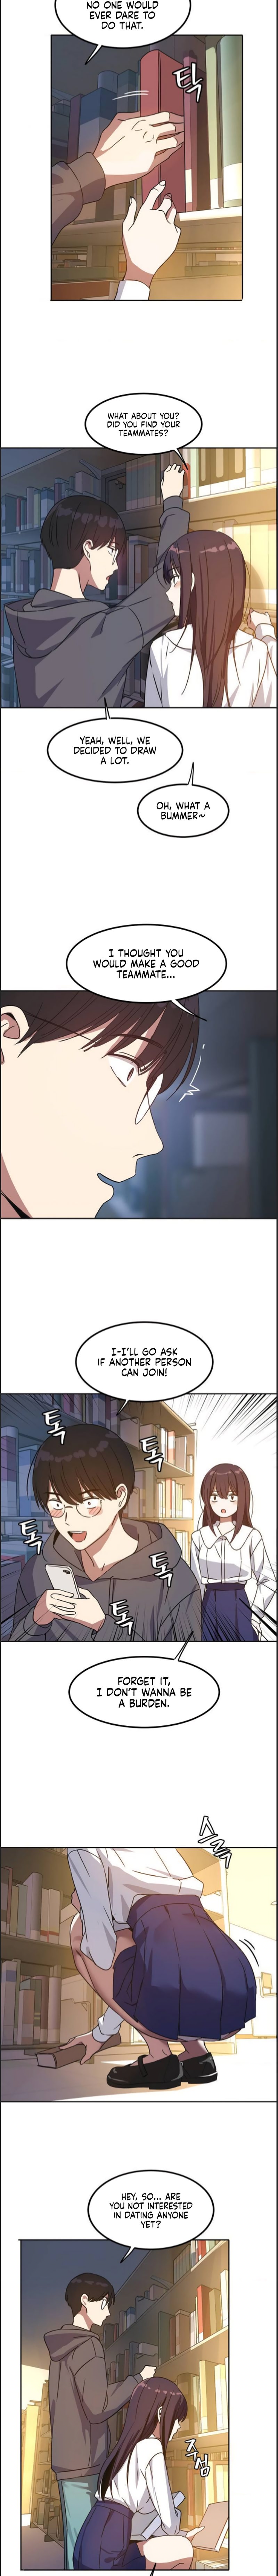 The Iron-Wall Beauty of My Department is a Masochist?! - Chapter 1 Page 7